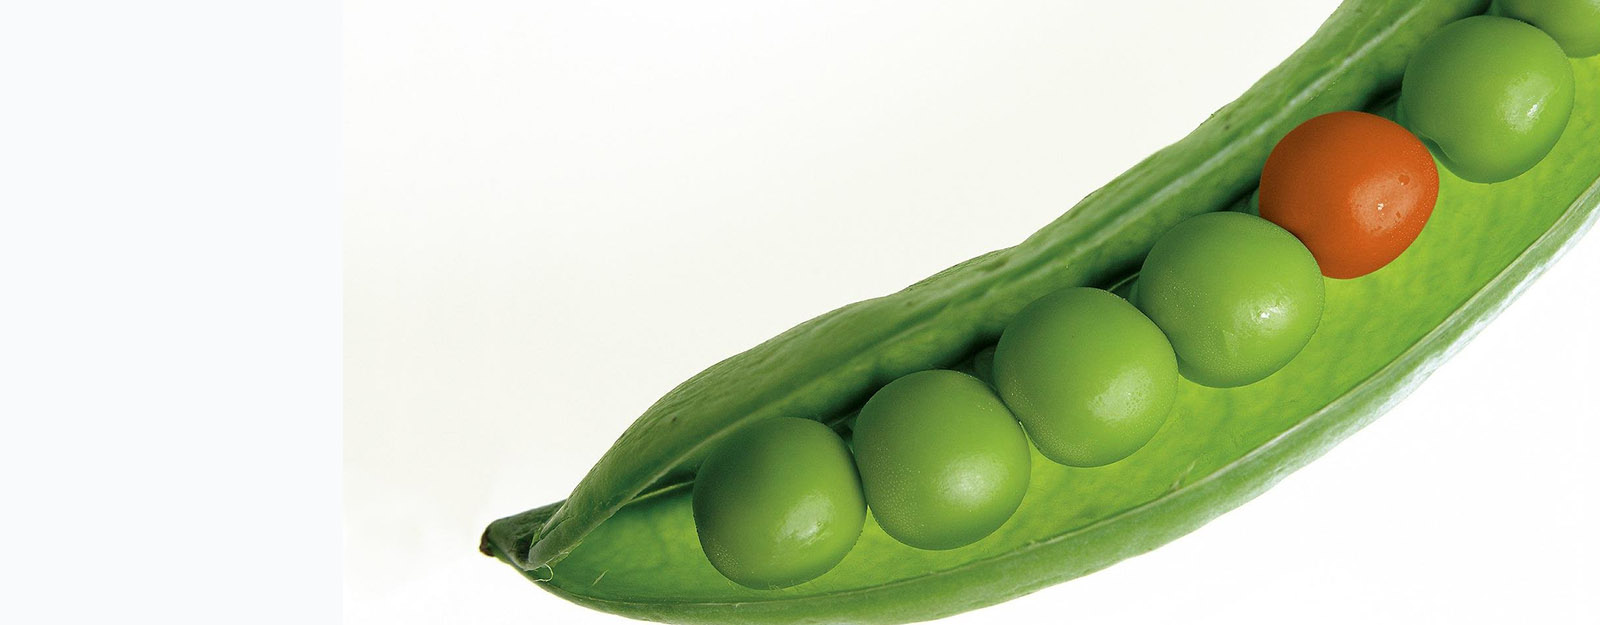 Image of peas in a pod. All peas are green with the exception of one red pea. Union State Bank commercial business services.